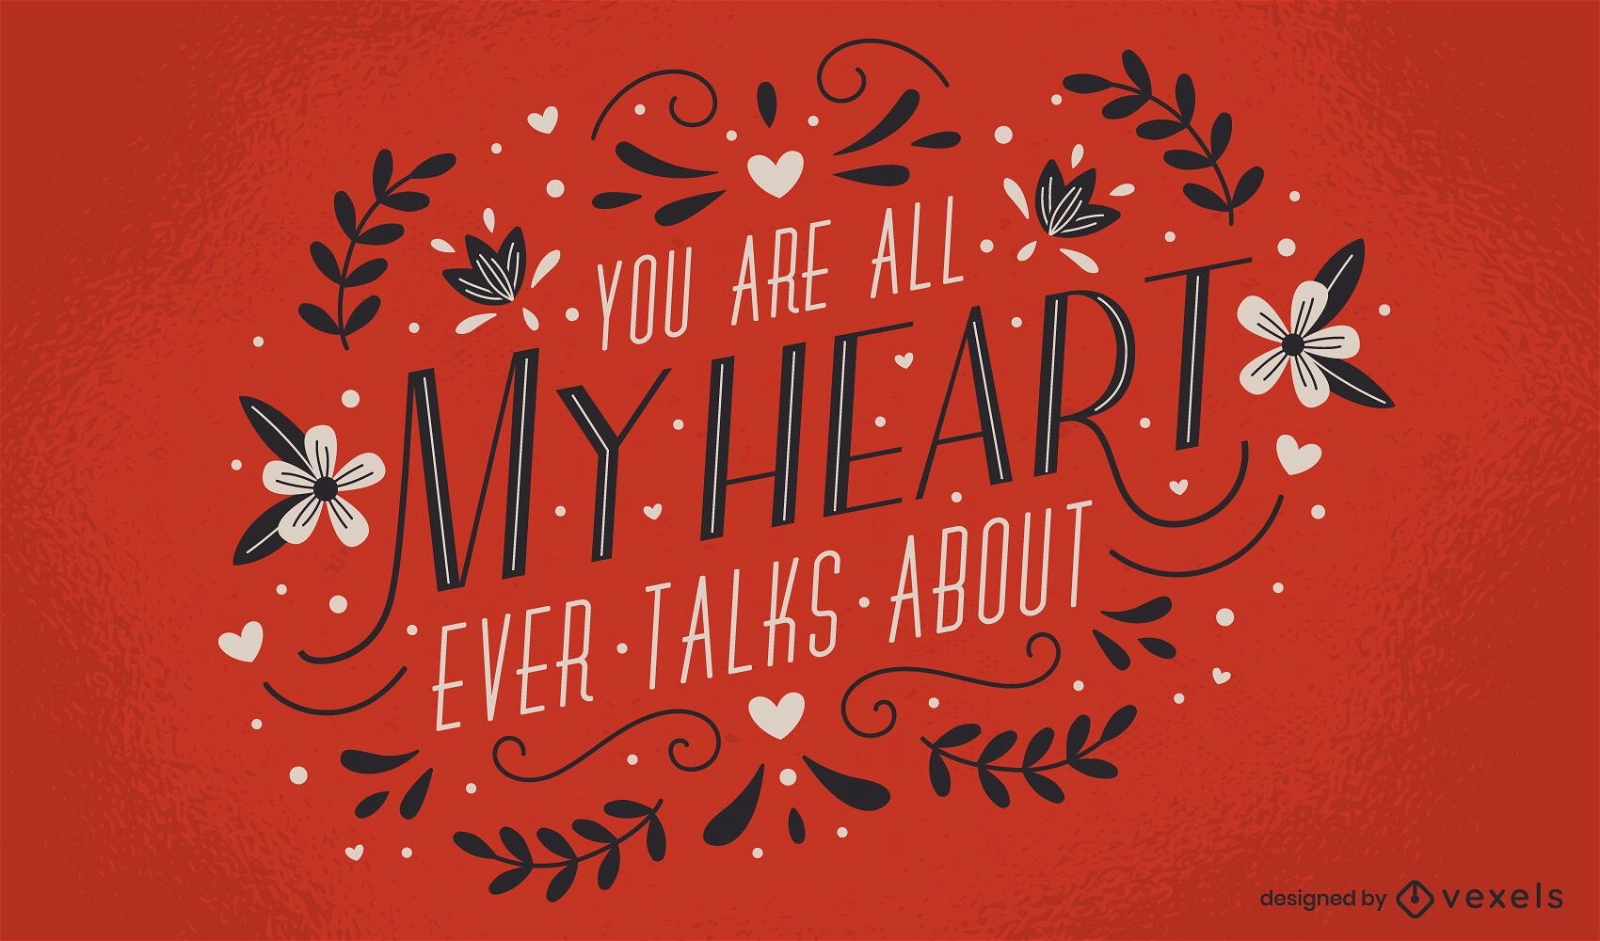 All my heart lettering design